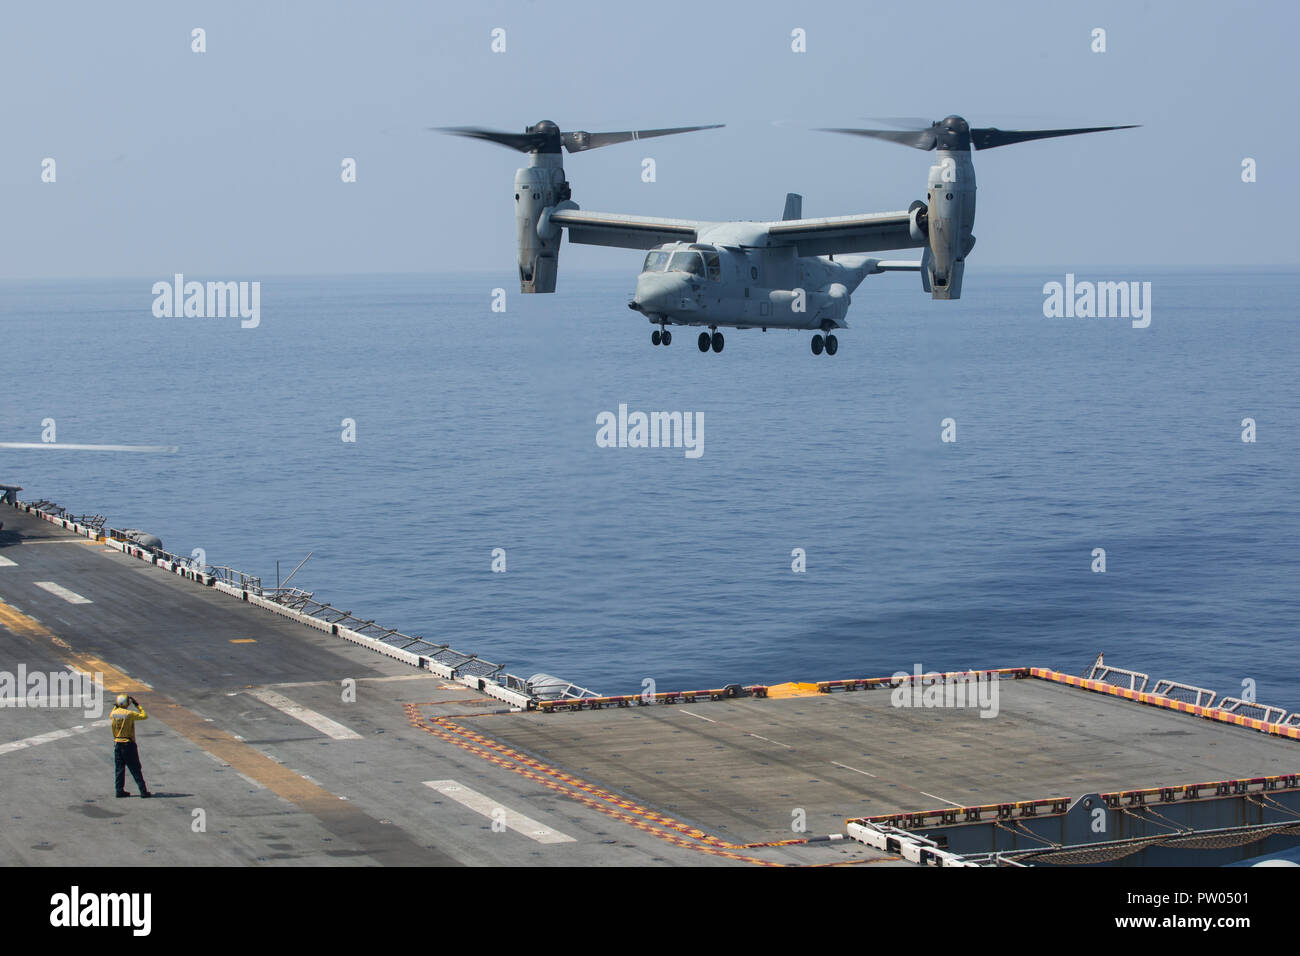 An MV-22B Osprey tiltrotor aircraft, belonging to Marine Medium Tiltrotor Squadron 262 (Reinforced), prepares to land on the flight deck of the amphibious assault ship USS Wasp (LHD 1), underway in the South China Sea, Oct. 11, 2018. Combat cargo Marines with the 31st Marine Expeditionary Unit off loaded the MV-22Bs, which brought back Marines and gear from exercise KAMANDAG 2. KAMANDAG 2 is a multinational exercise, including; the Republic of the Philippines, Japan, and the United States. The 31st MEU, the Marine Corps’ only continuously forward-deployed MEU, provides a flexible force ready t Stock Photo